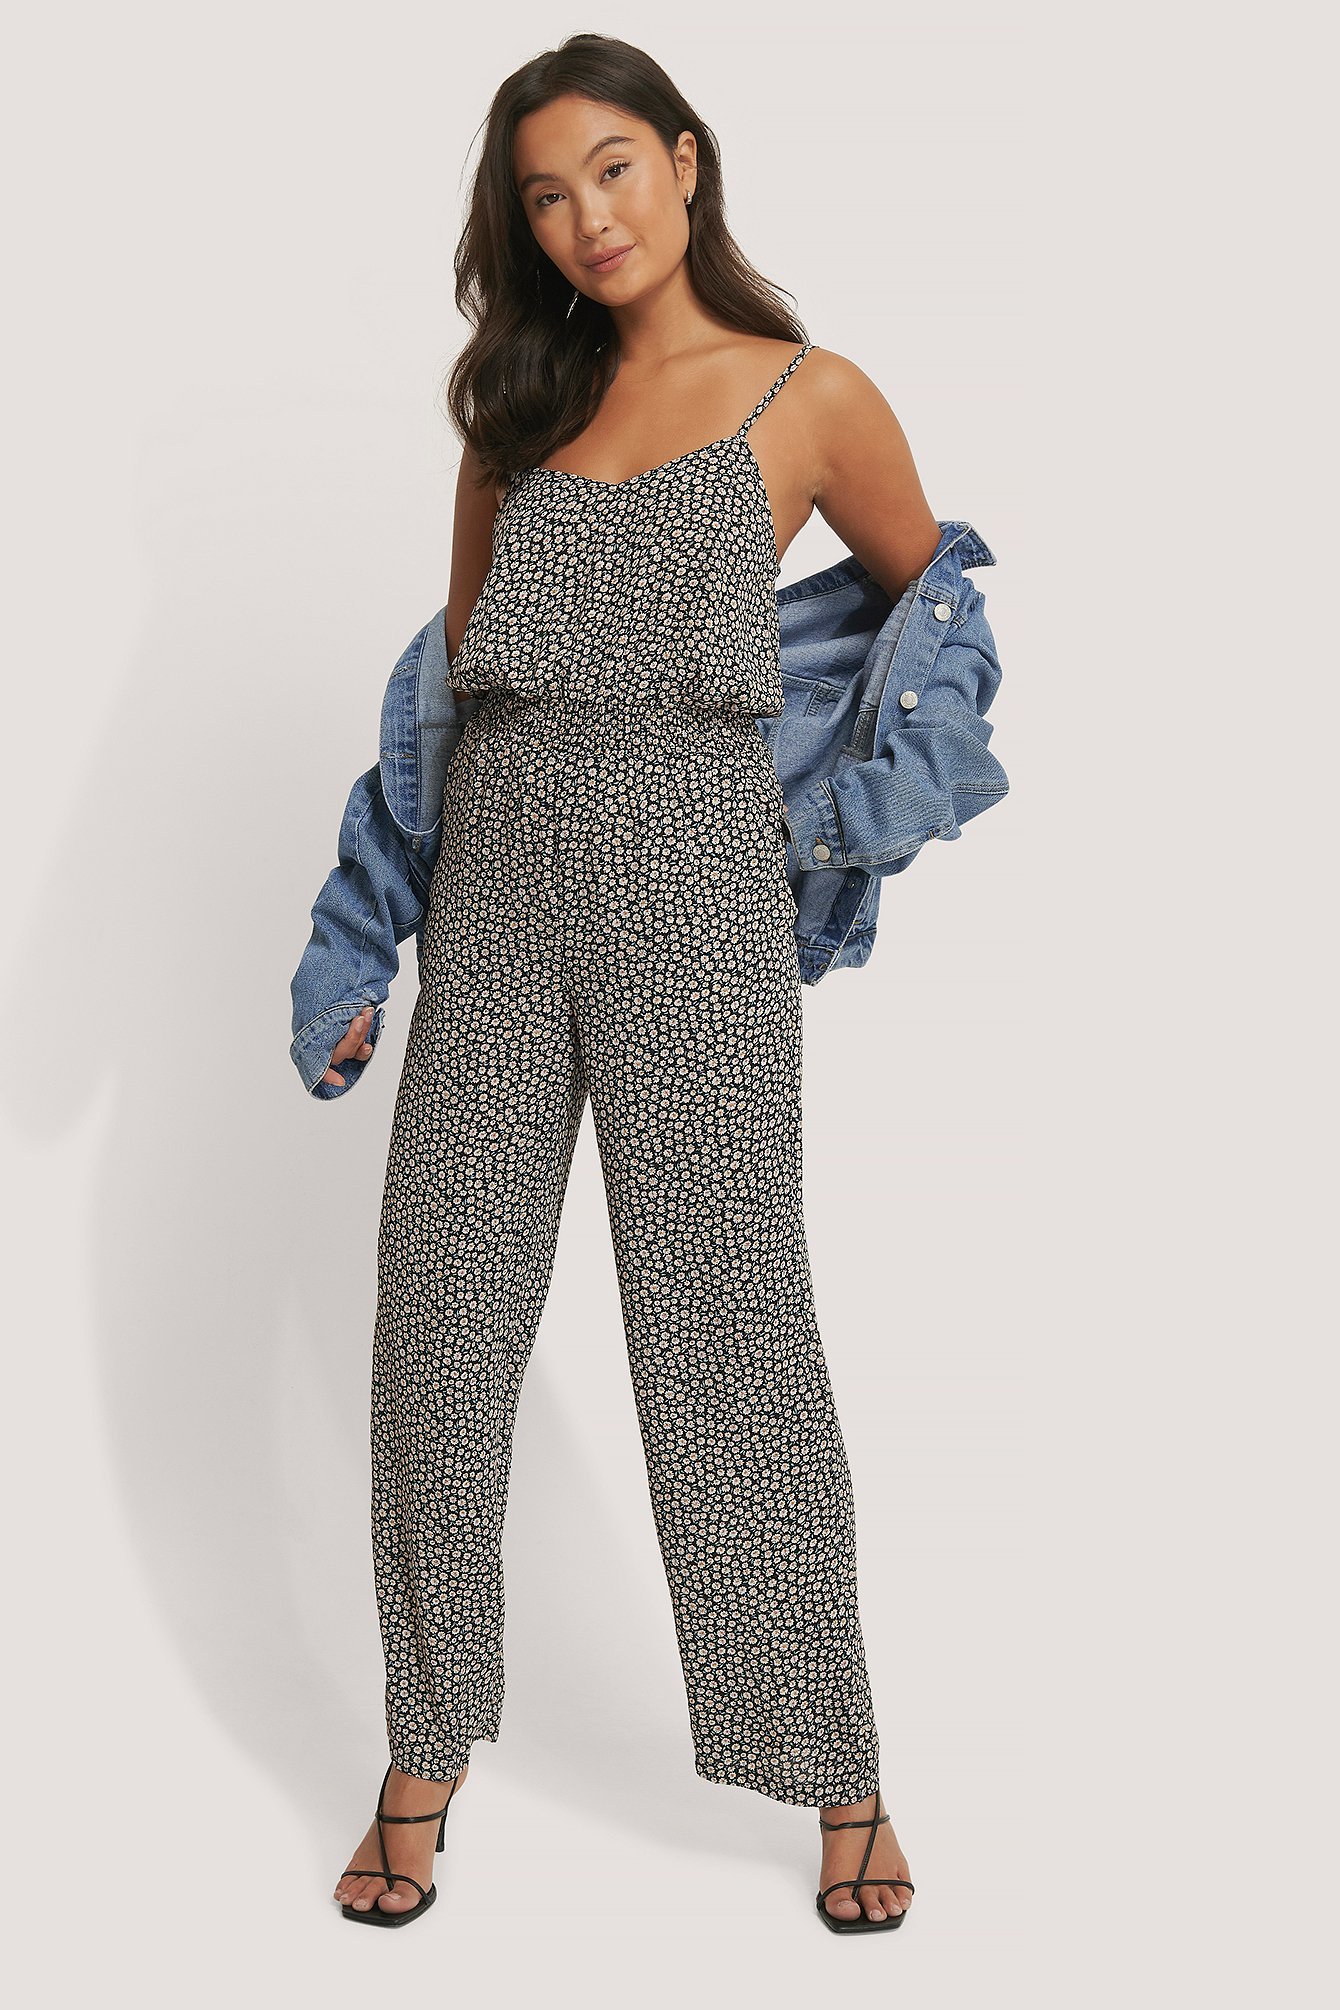 Smocked Printed Jumpsuit Outfit.